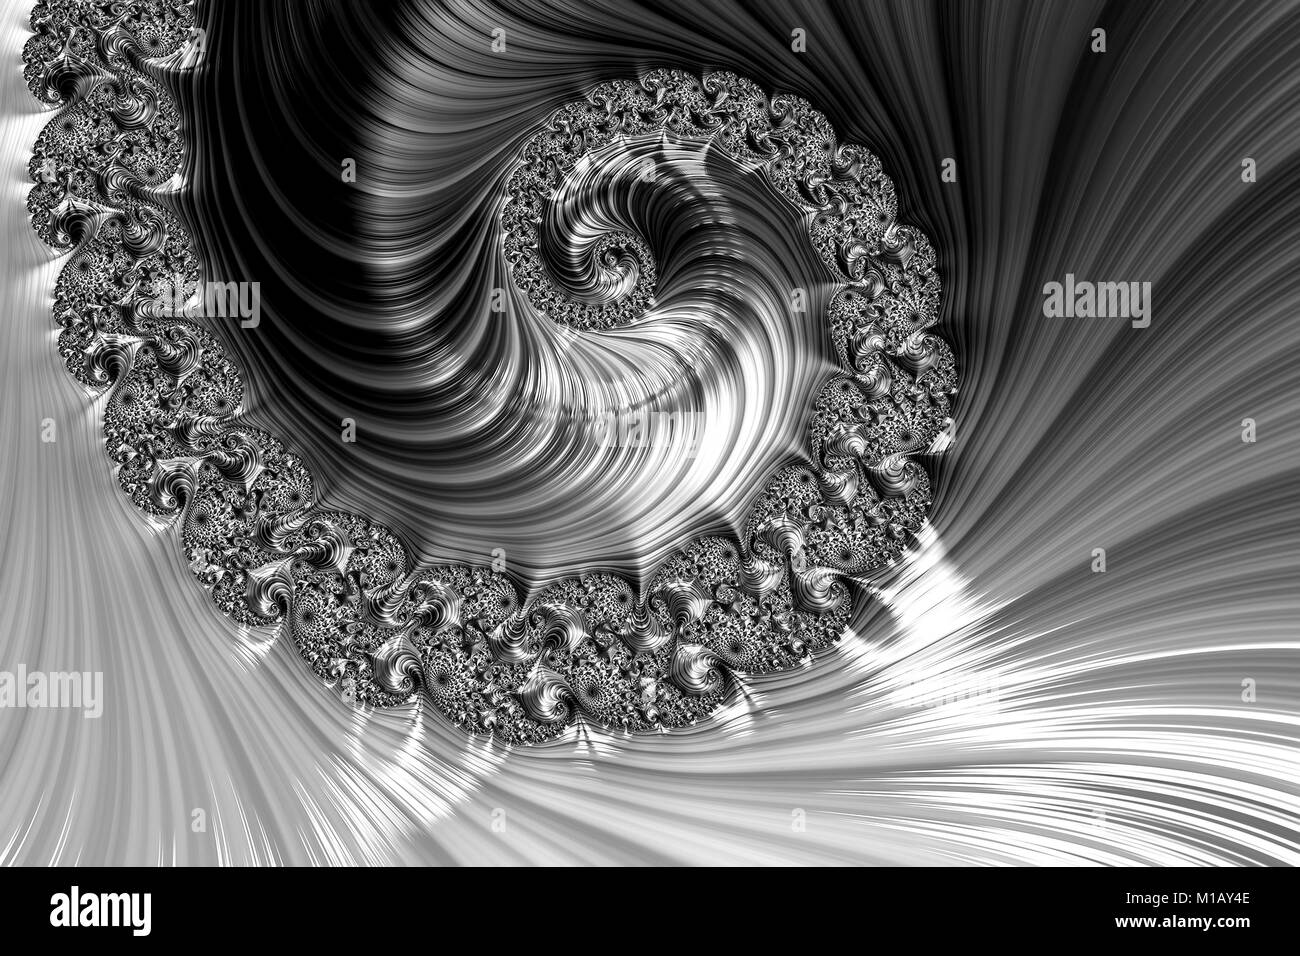 Fractal spiral - abstract digitally generated image Stock Photo